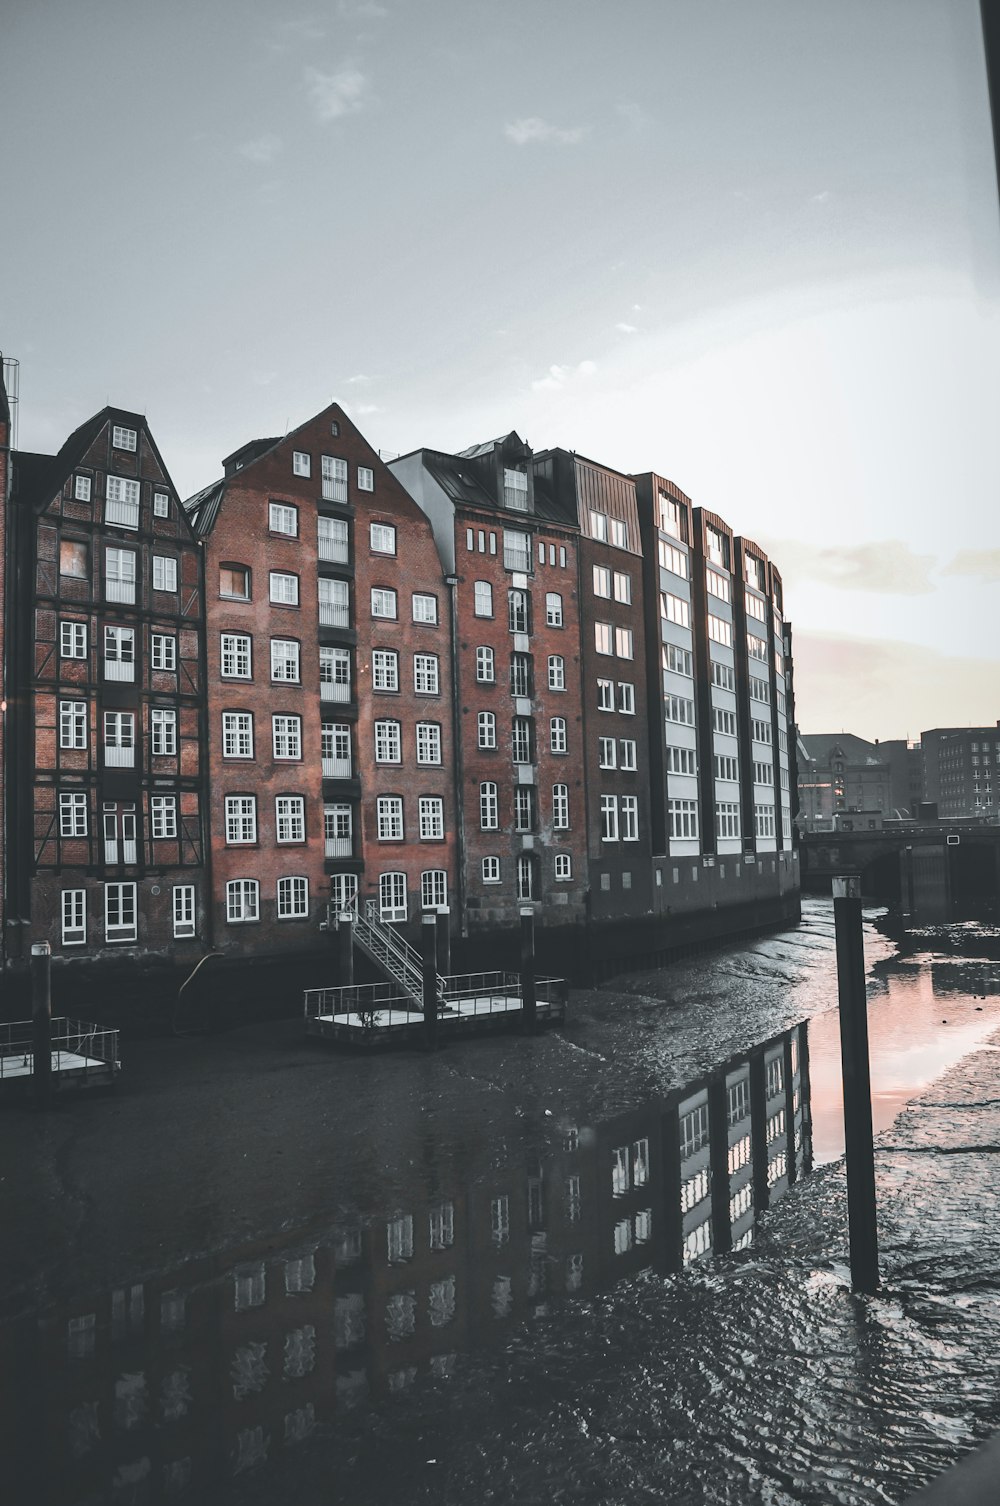 a row of red brick buildings next to a body of water